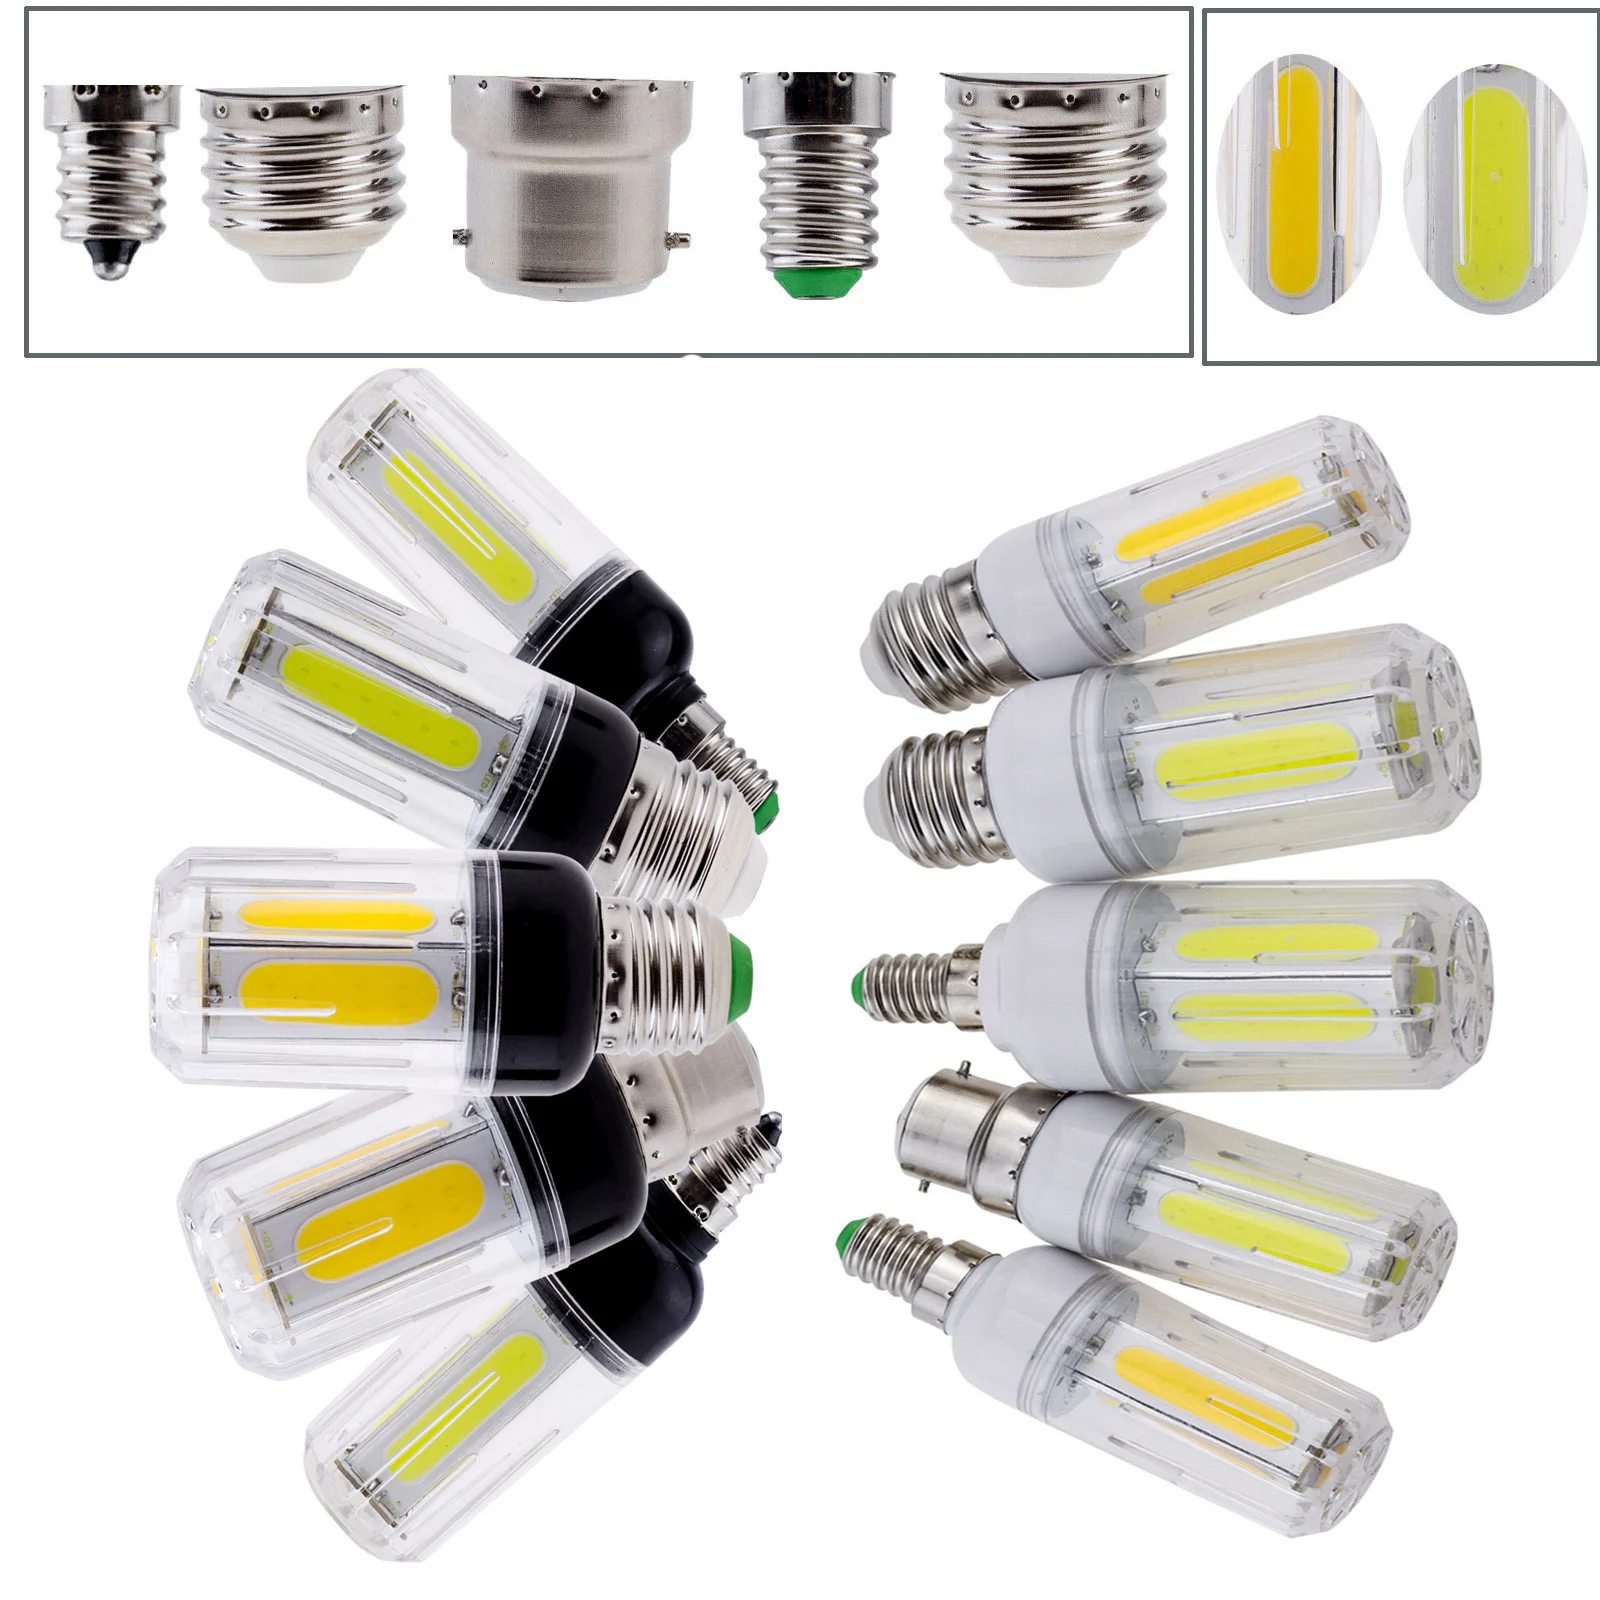 

5Pcs COB LED Corn Bulb E27 E26 E12 B22 E14 16W 12W AC 85-265V 110V 220V Ultra Bright Light Home Table Lamps Lighting